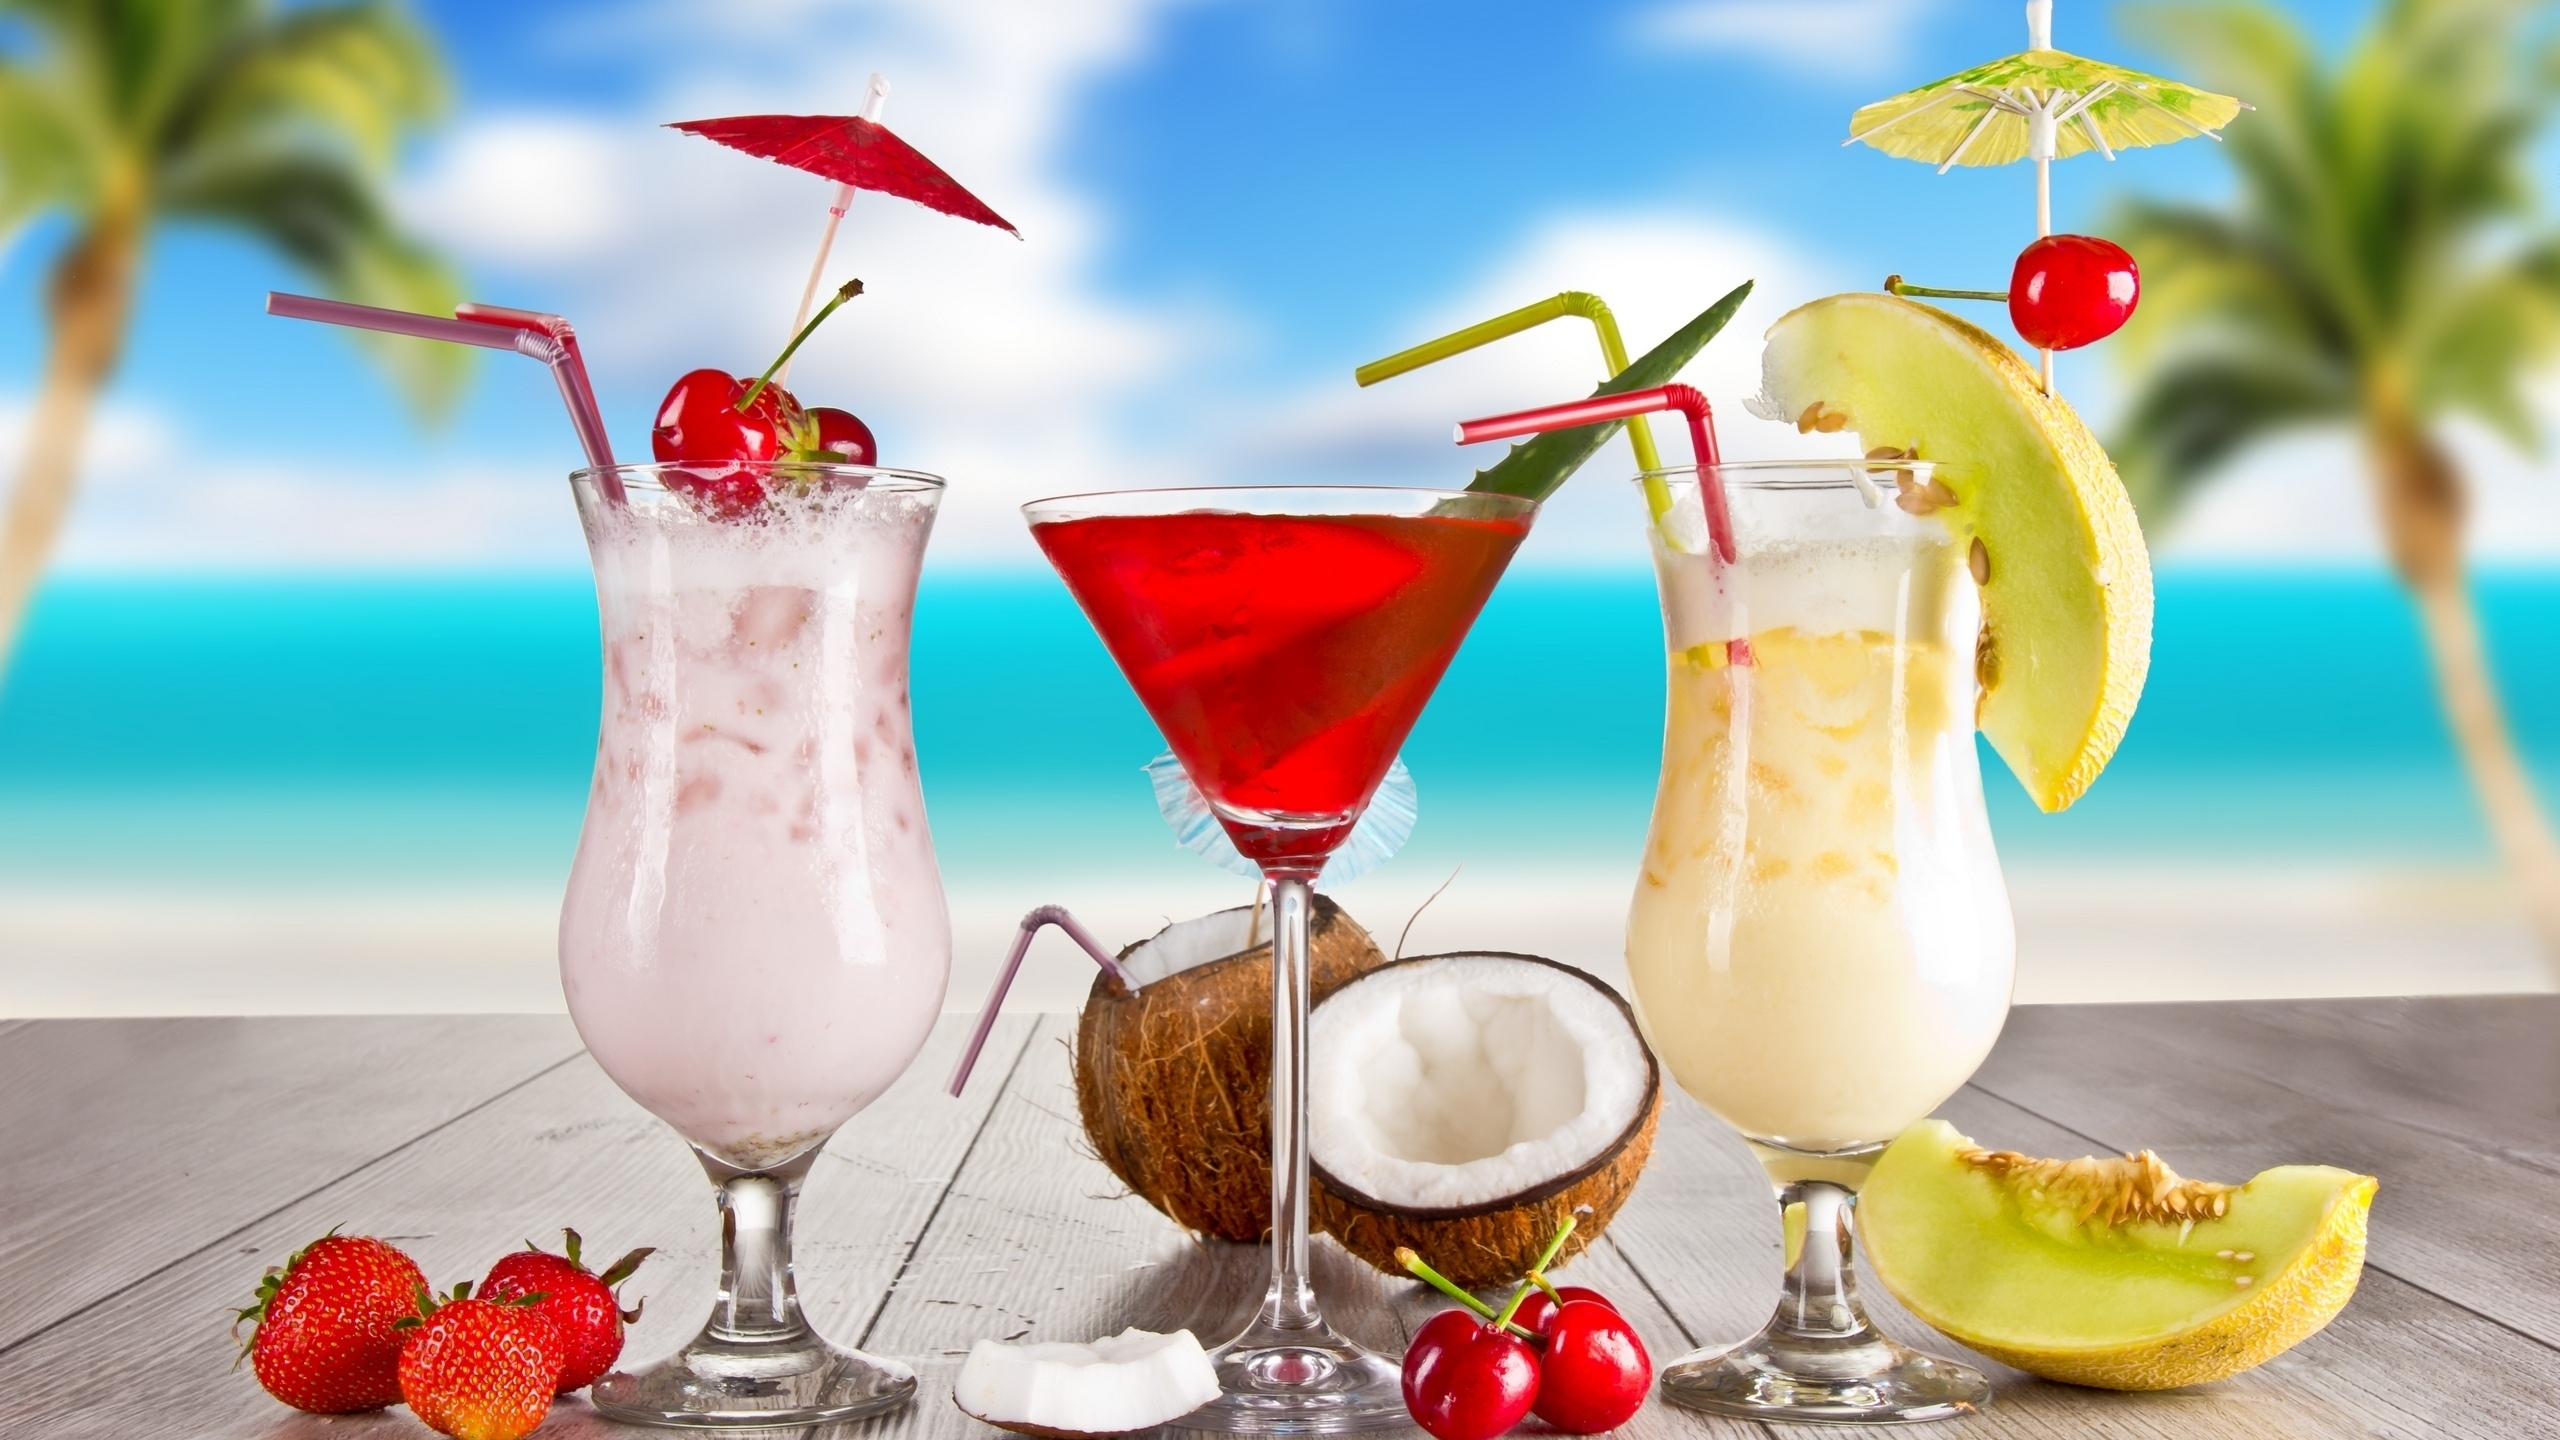 Exotic Summer Cocktails for 2560x1440 HDTV resolution